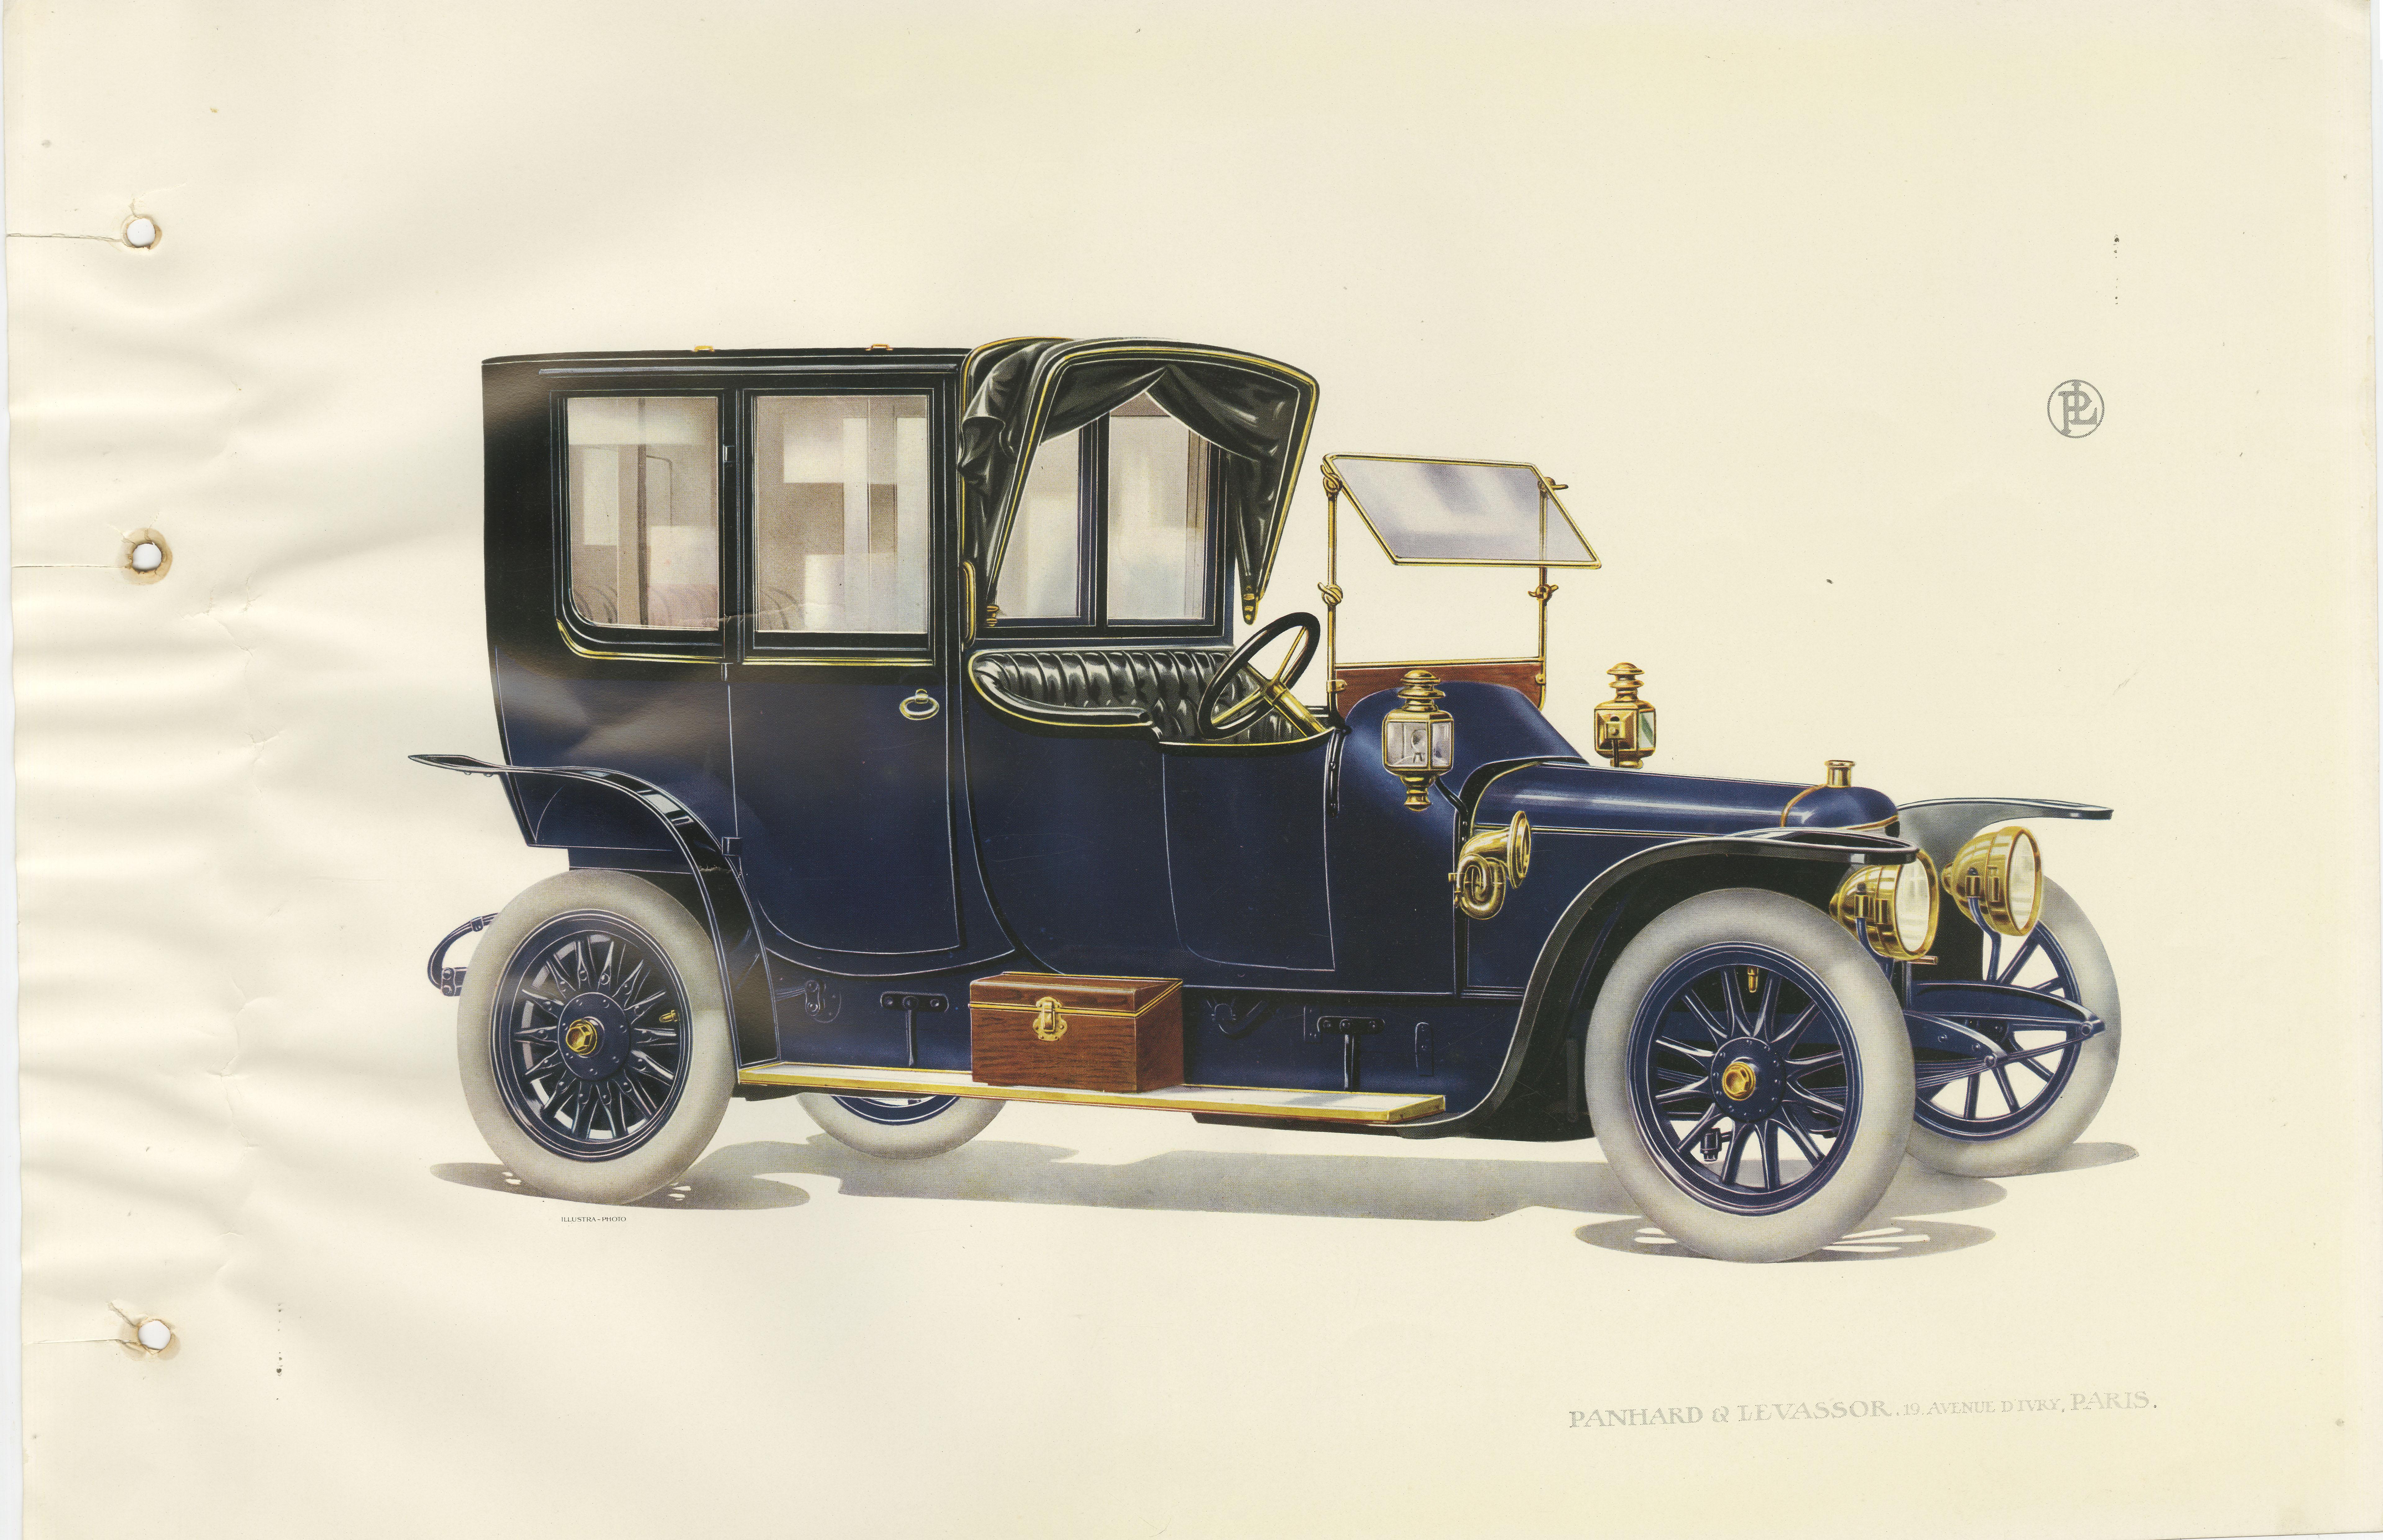 Antique print of a Panhard et Levassor coupe avant torpedo car. This print originates from a rare catalog of the exclusive French brand Panhard & Levassor from 1914.

Panhard was a French motor vehicle manufacturer that began as one of the first